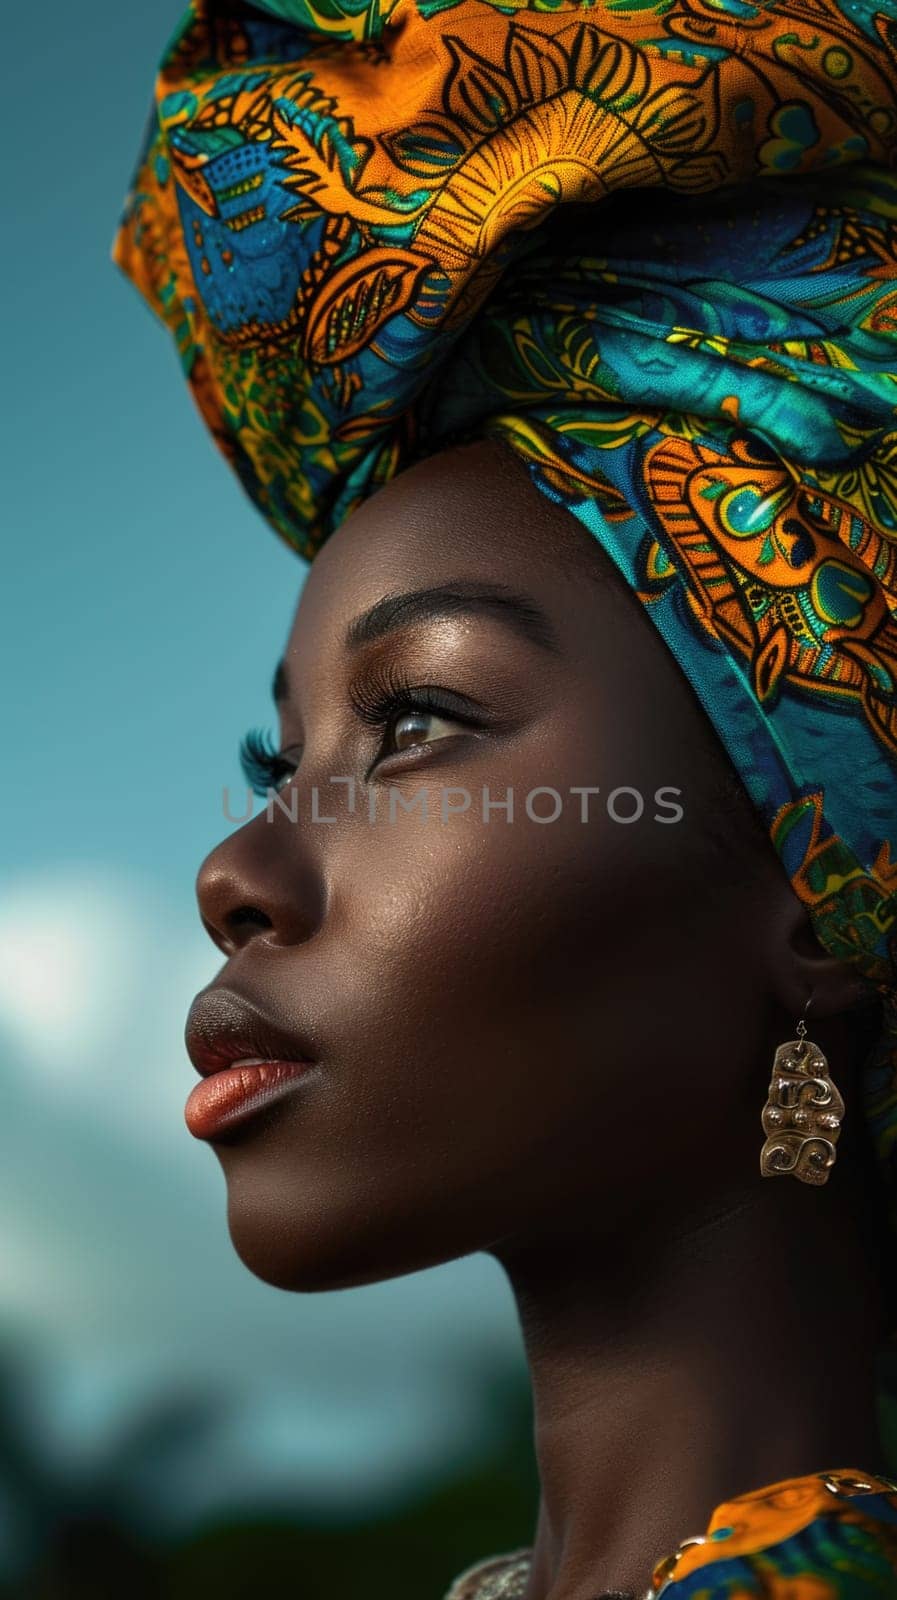 Portrait of an African American Woman in a Turban: The Beauty of Ethnic Fashion by Yurich32